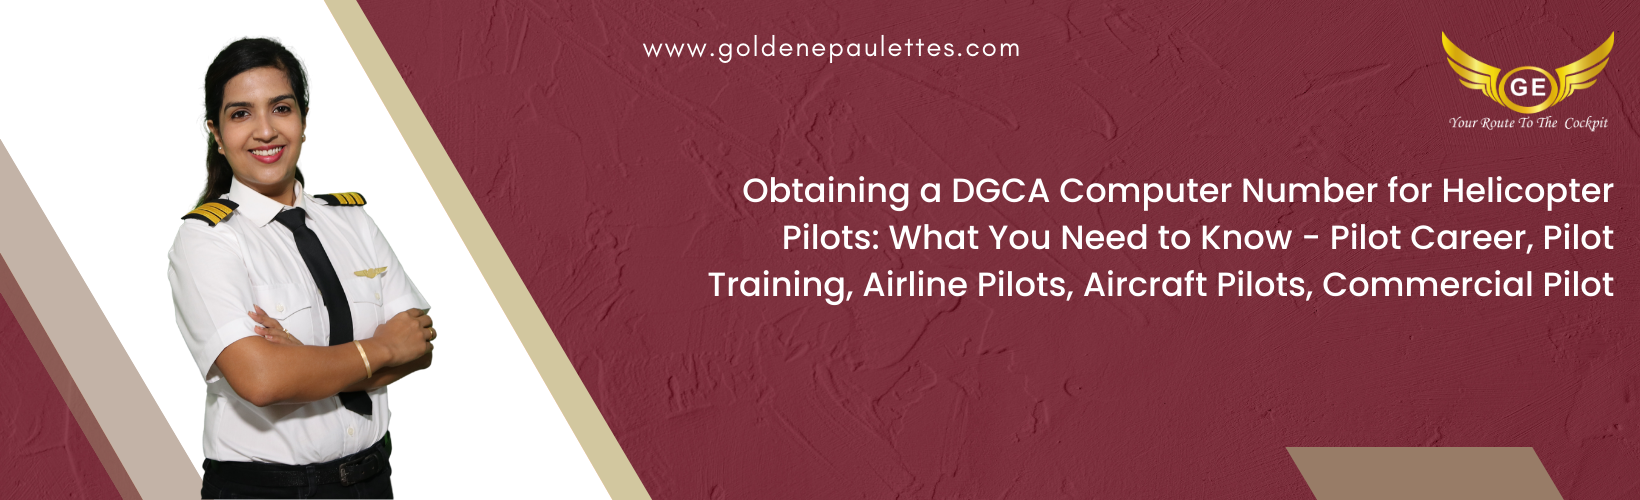 What You Need to Know About Obtaining a DGCA Computer Number for Helicopter Pilots